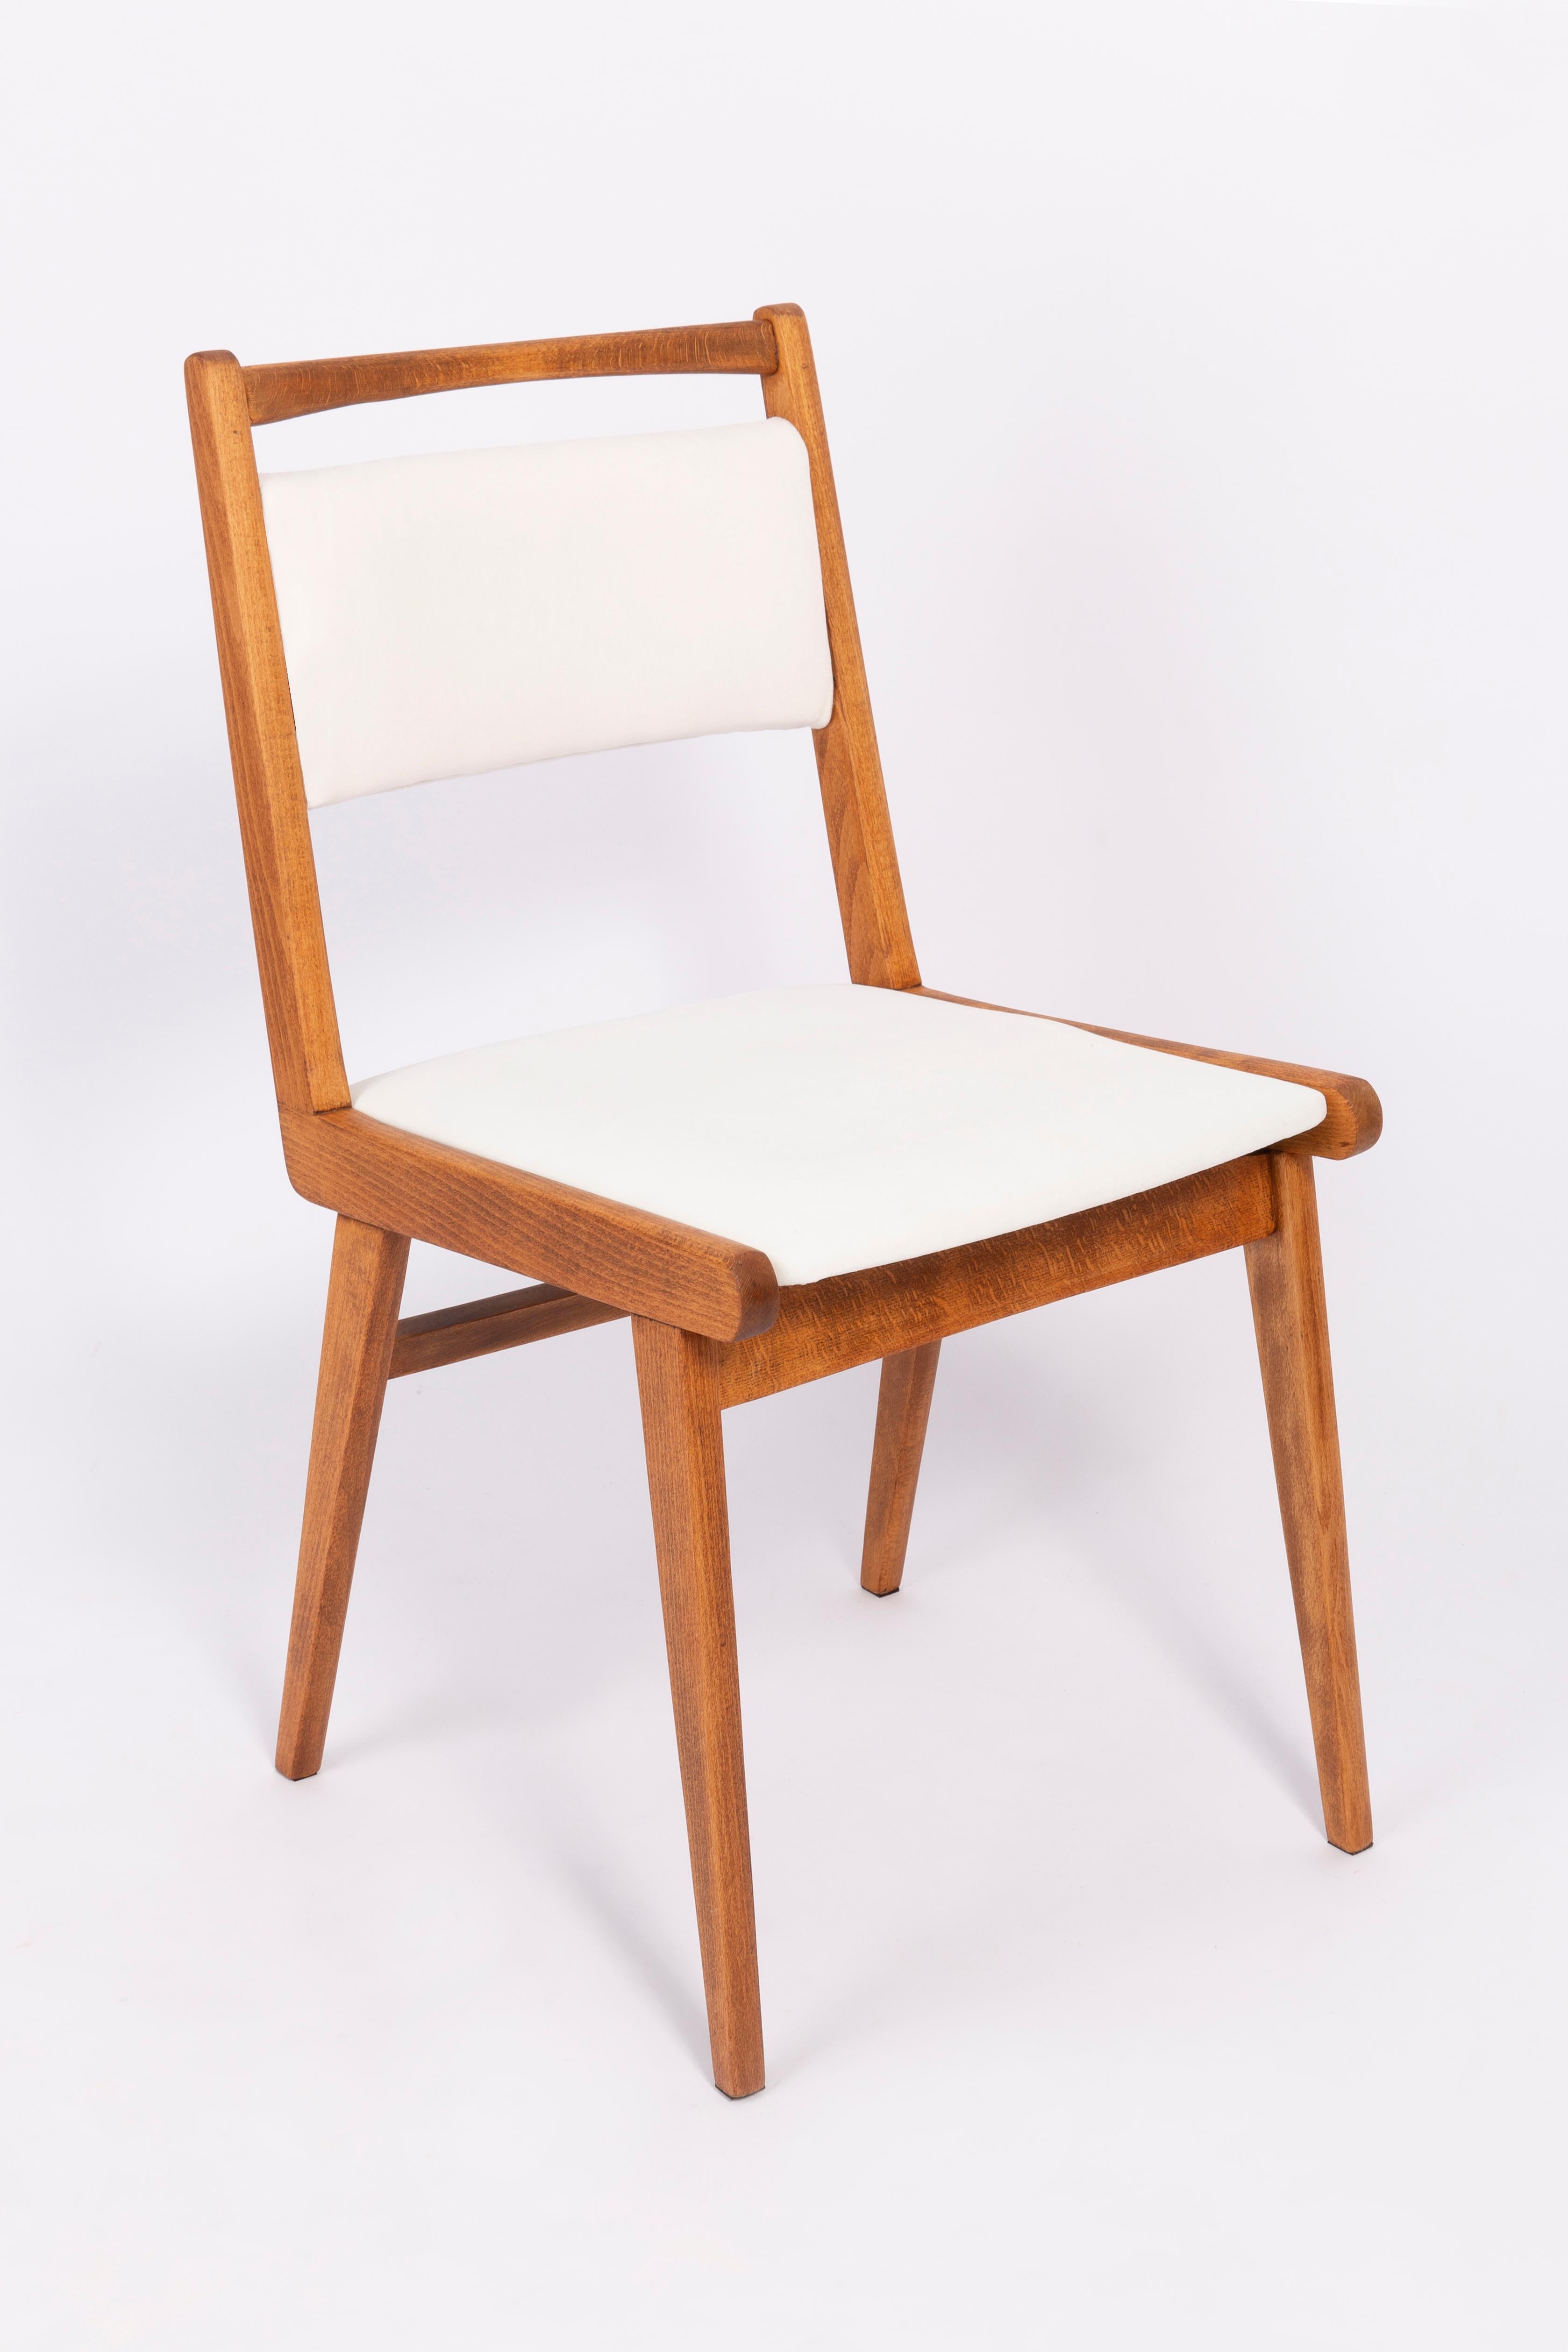 Chairs designed by Prof. Rajmund Halas. It is jar type model. Made of beechwood. Chairs are after a complete upholstery renovation, the woodwork has been refreshed. Seat and back is dressed in a white, durable and pleasant to the touch velvet